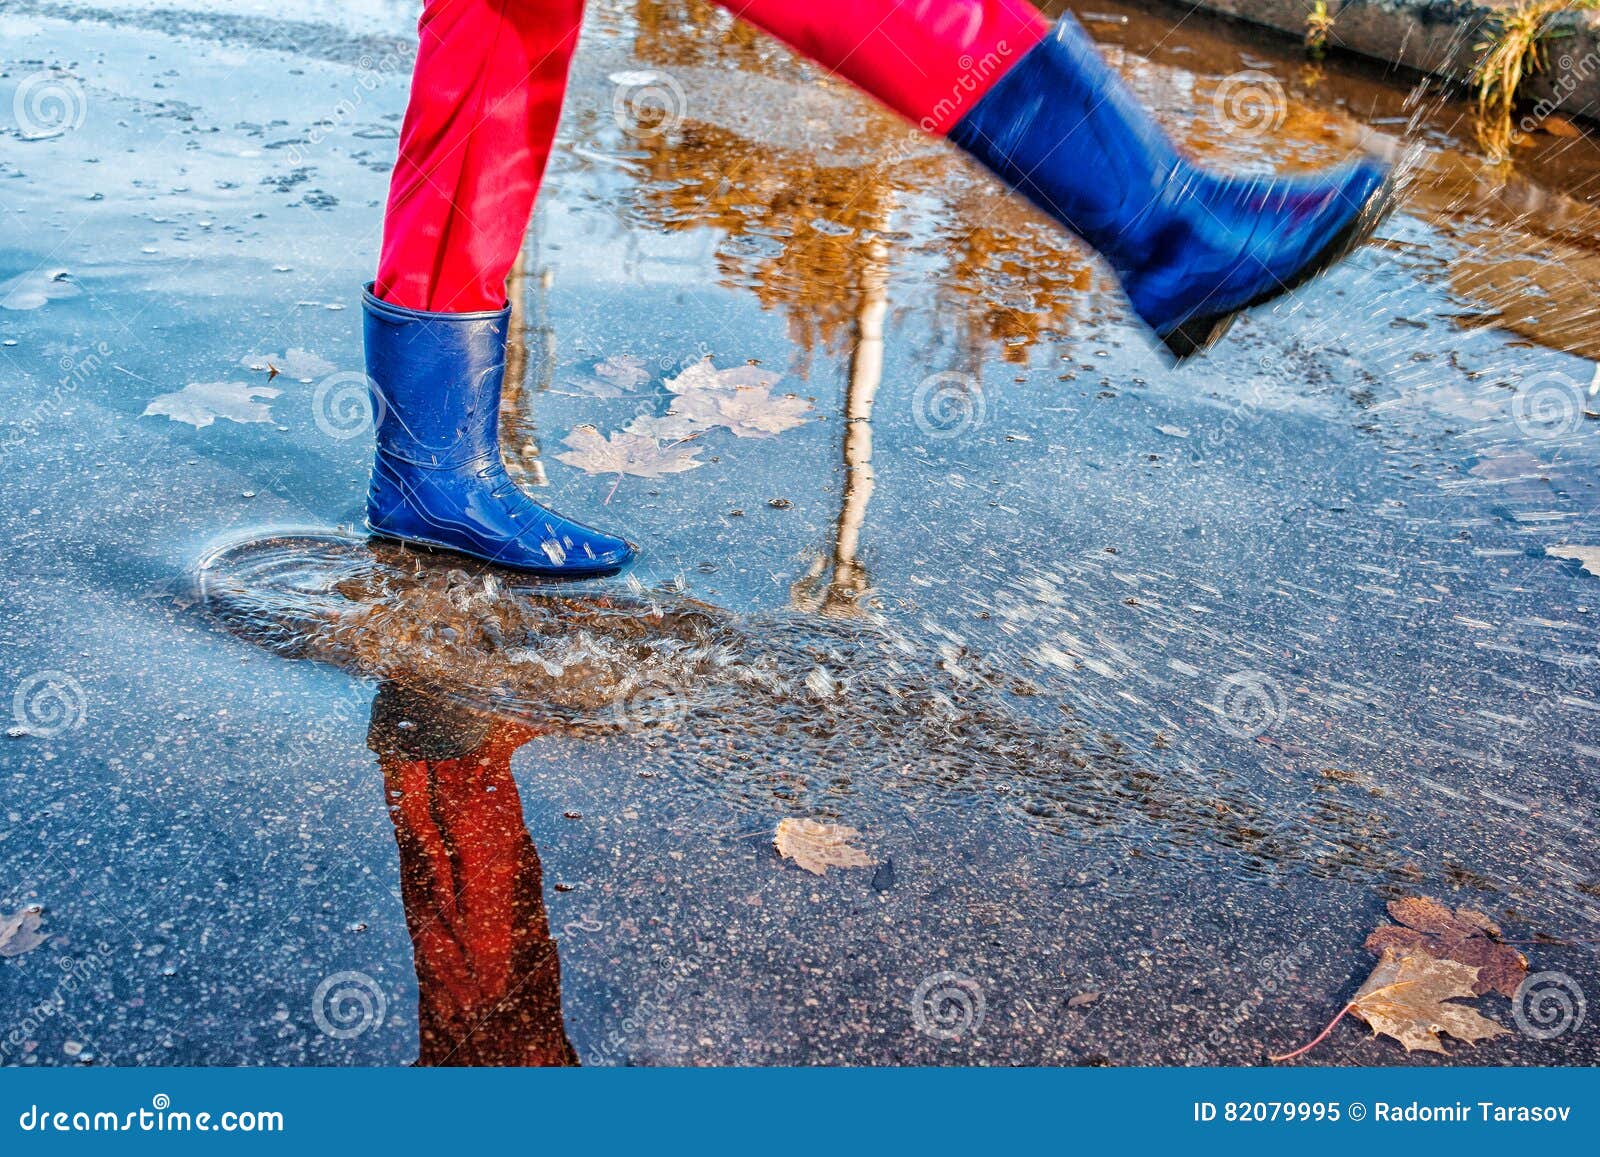 Girl Standing in a Puddle of Water Splashes Stock Image - Image of girl ...